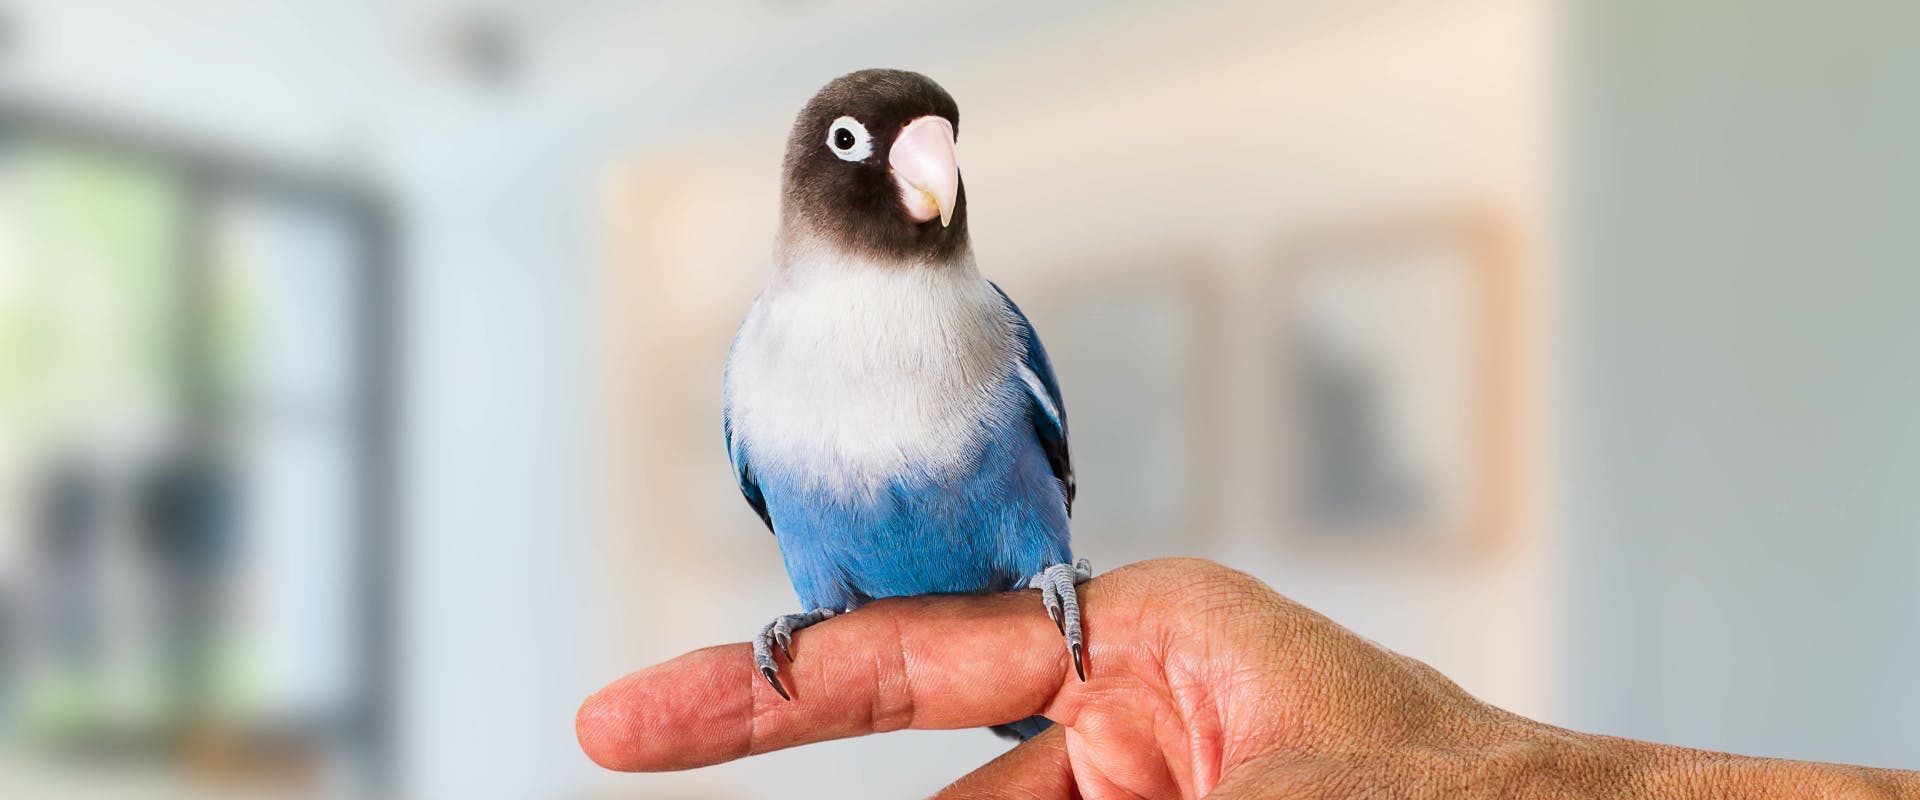 A bird standing on someone's finger.